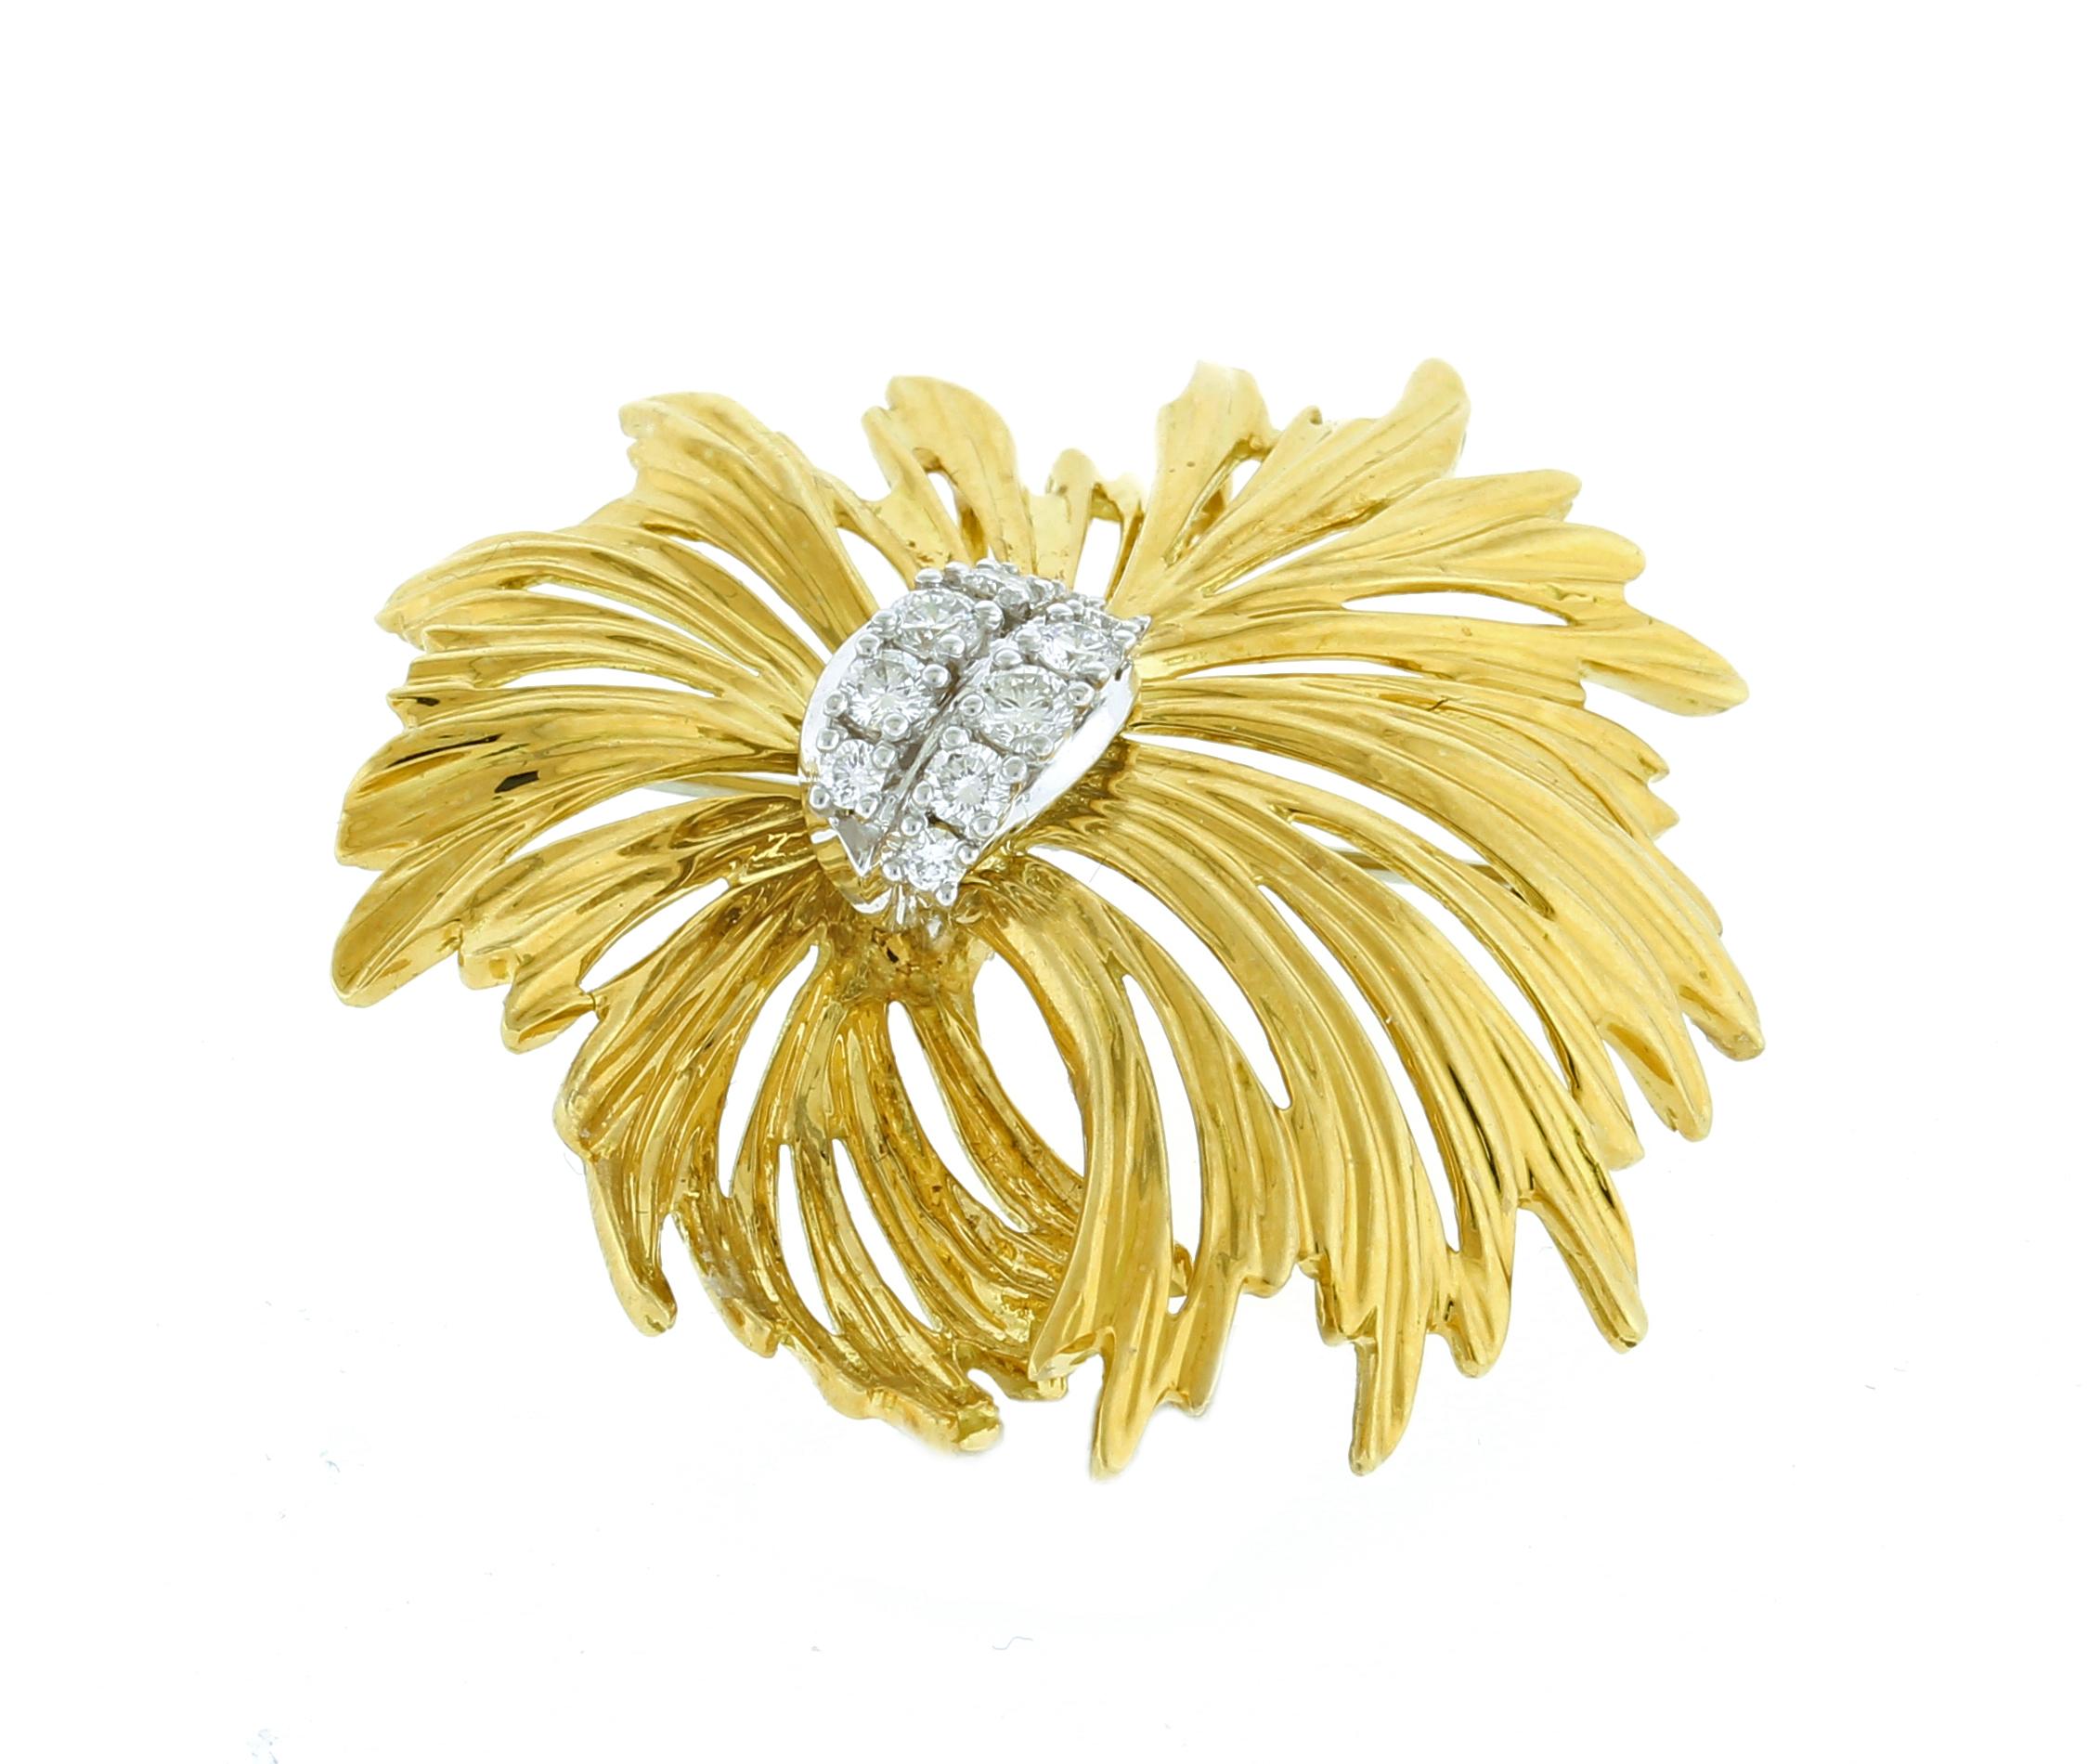 From Henry Dankner, this piece can be worn as a brooch or pendant.
♦ Designer: Henry Dankner
♦ Metal: 18kt yellow gold
♦ Length: 1 3/4inches
♦ Stamps: Dankner, 18k and Copyright
♦ Gemstone: 10Diamonds=1ct
♦ Packaging: Pampillonia Presentation Box
♦